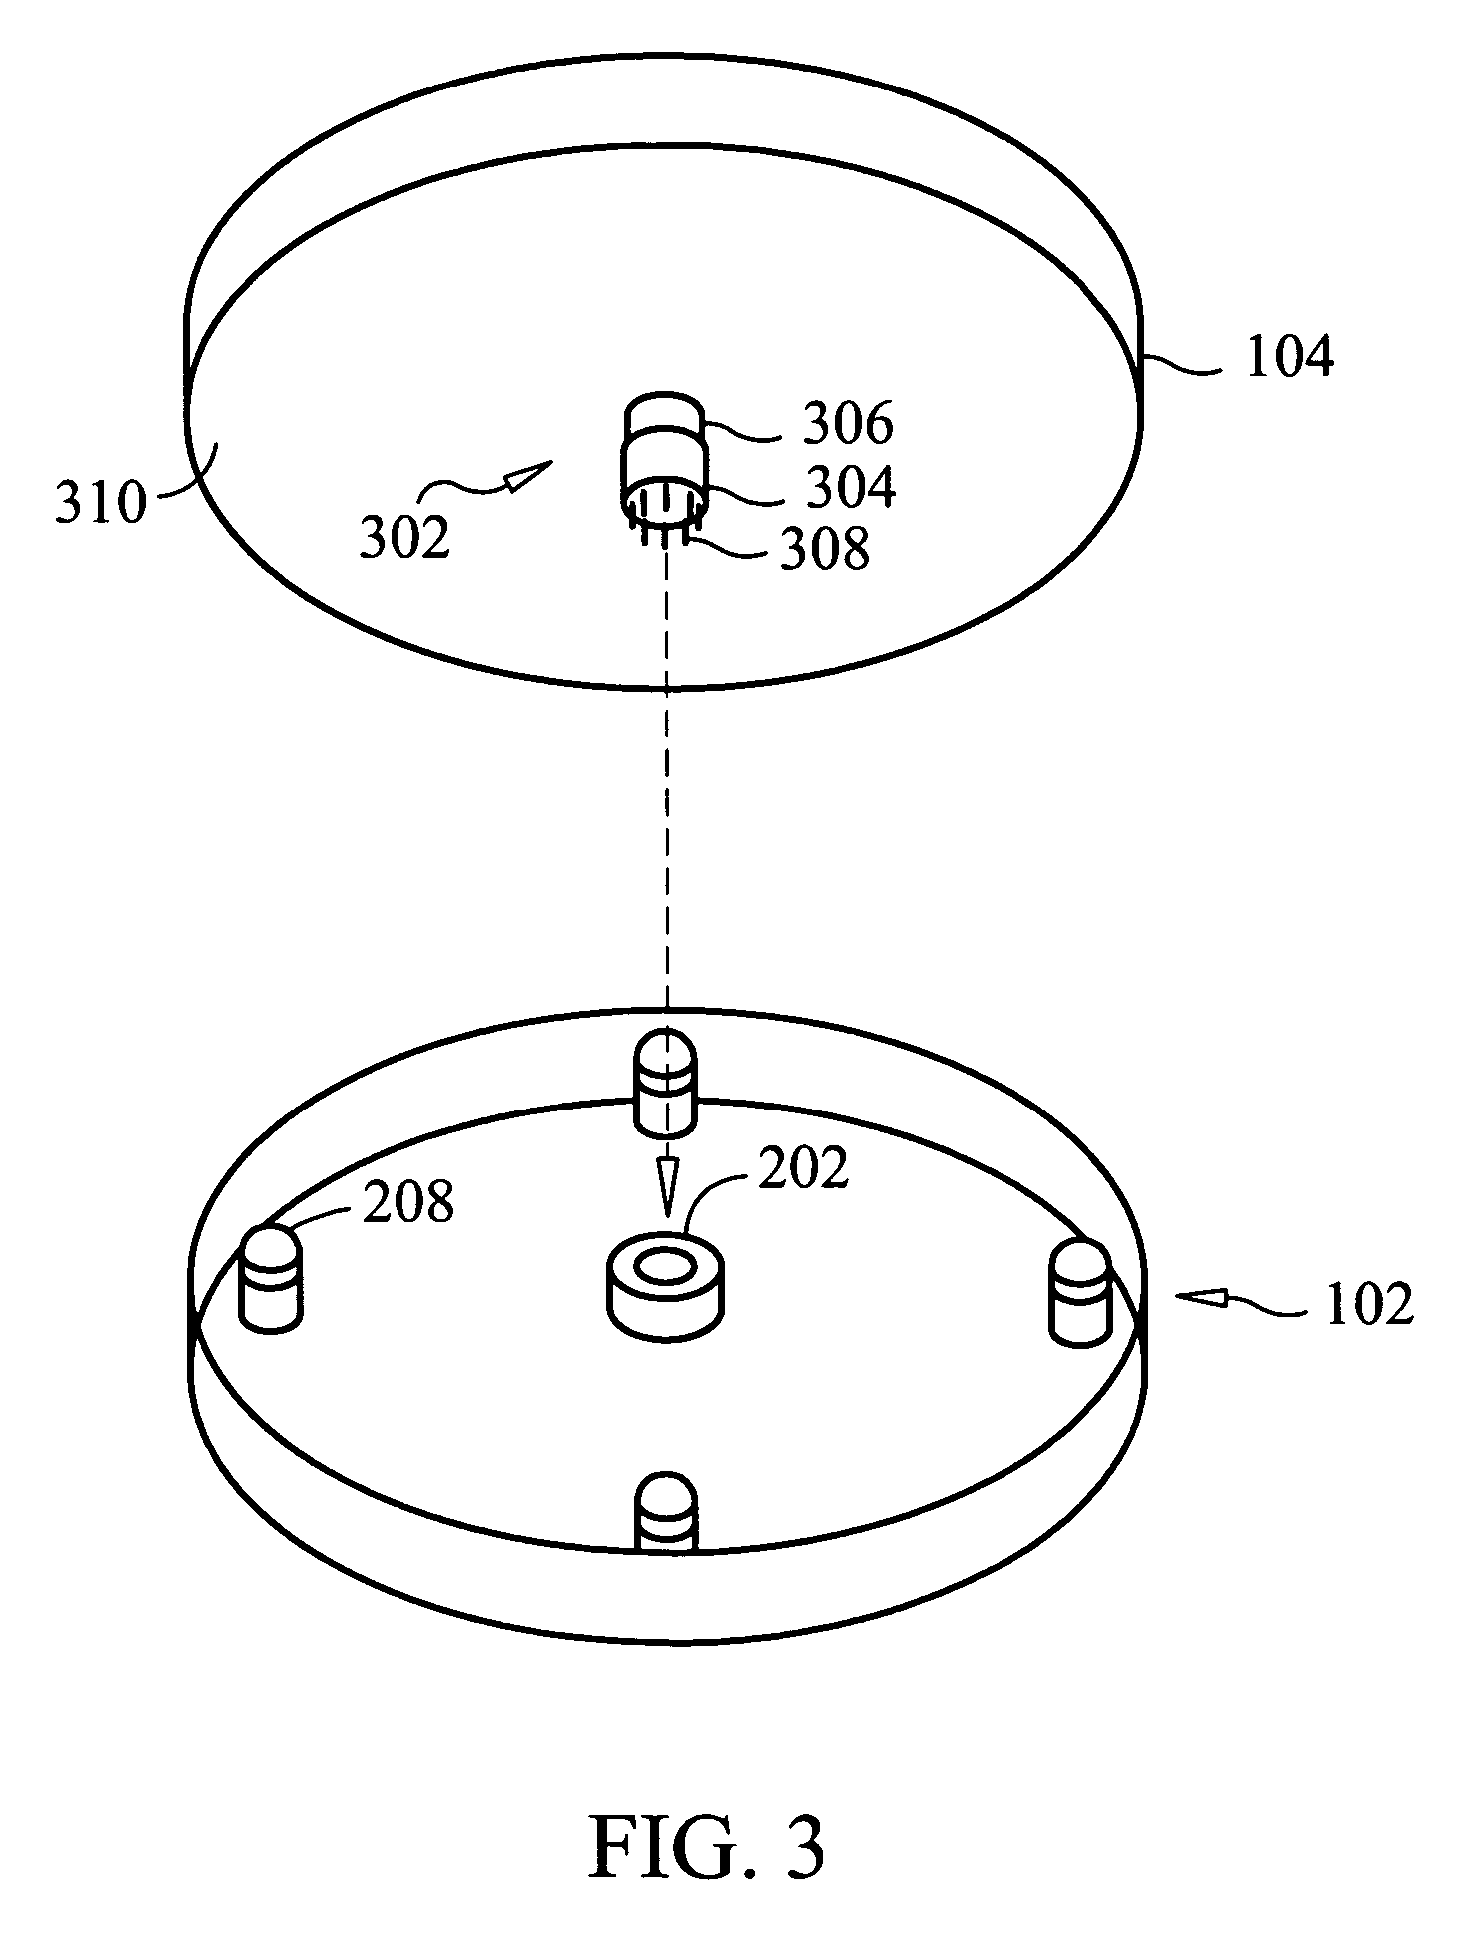 Continuously rotatable electronic-device organizer